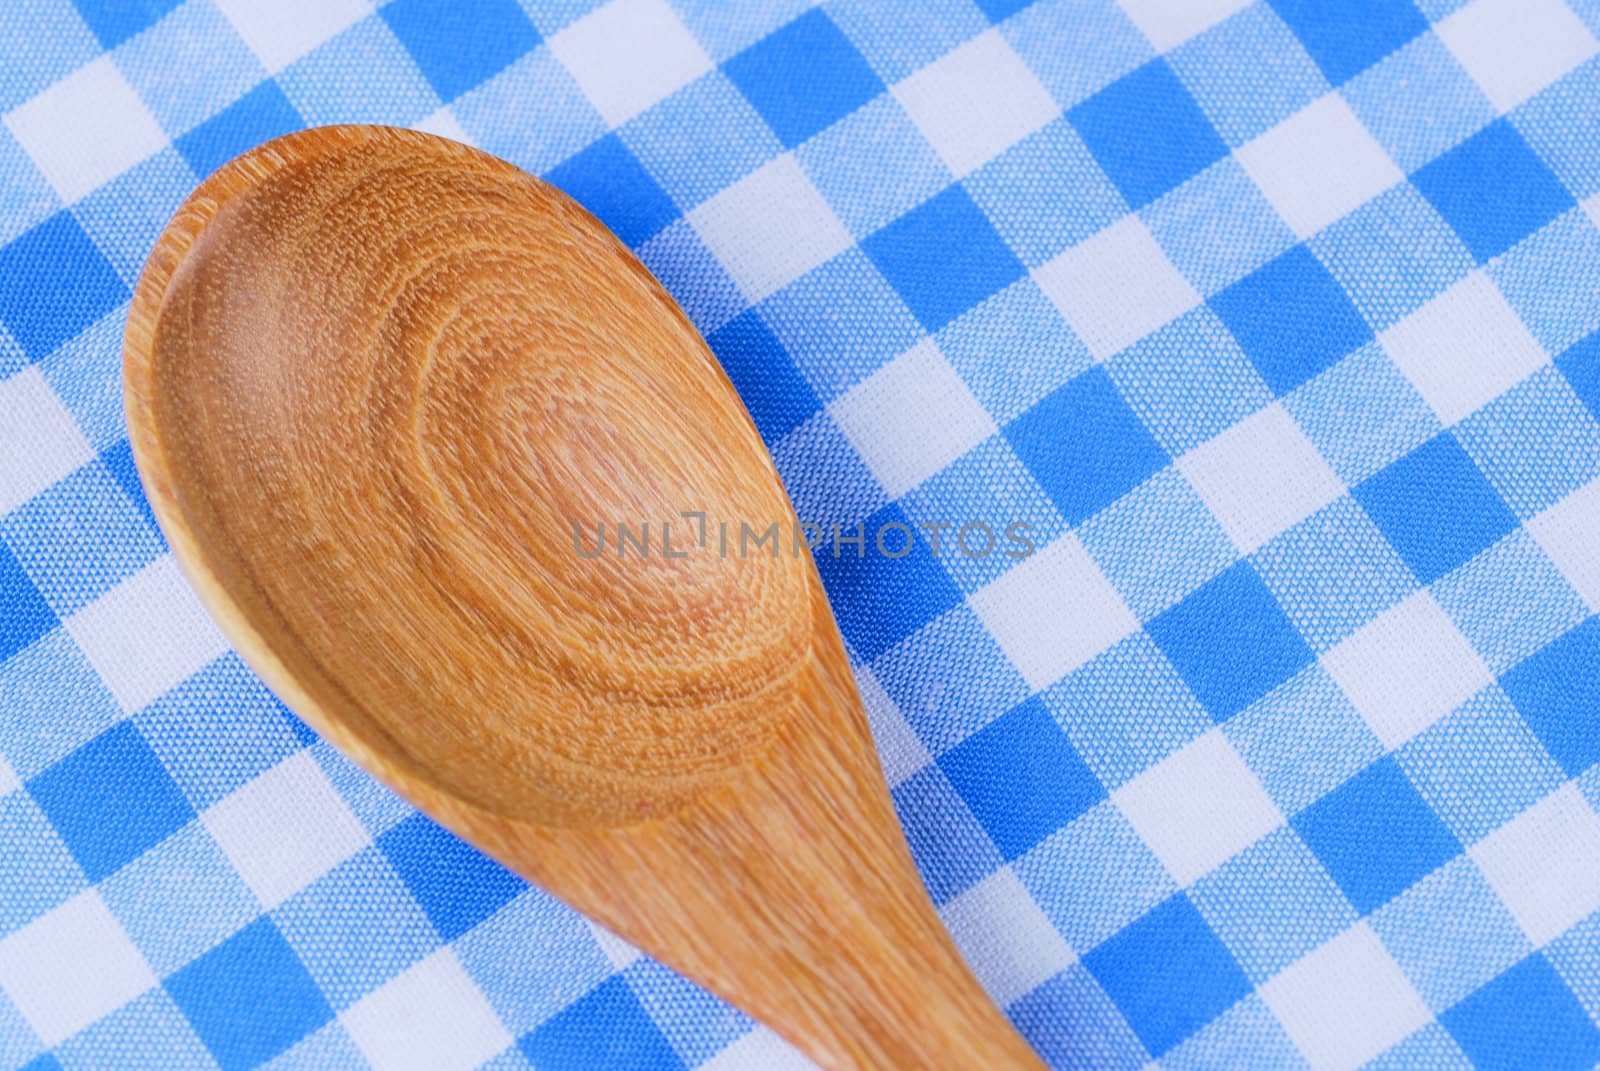 Wooden spoon,  tablecloth, fork on table background  by teen00000